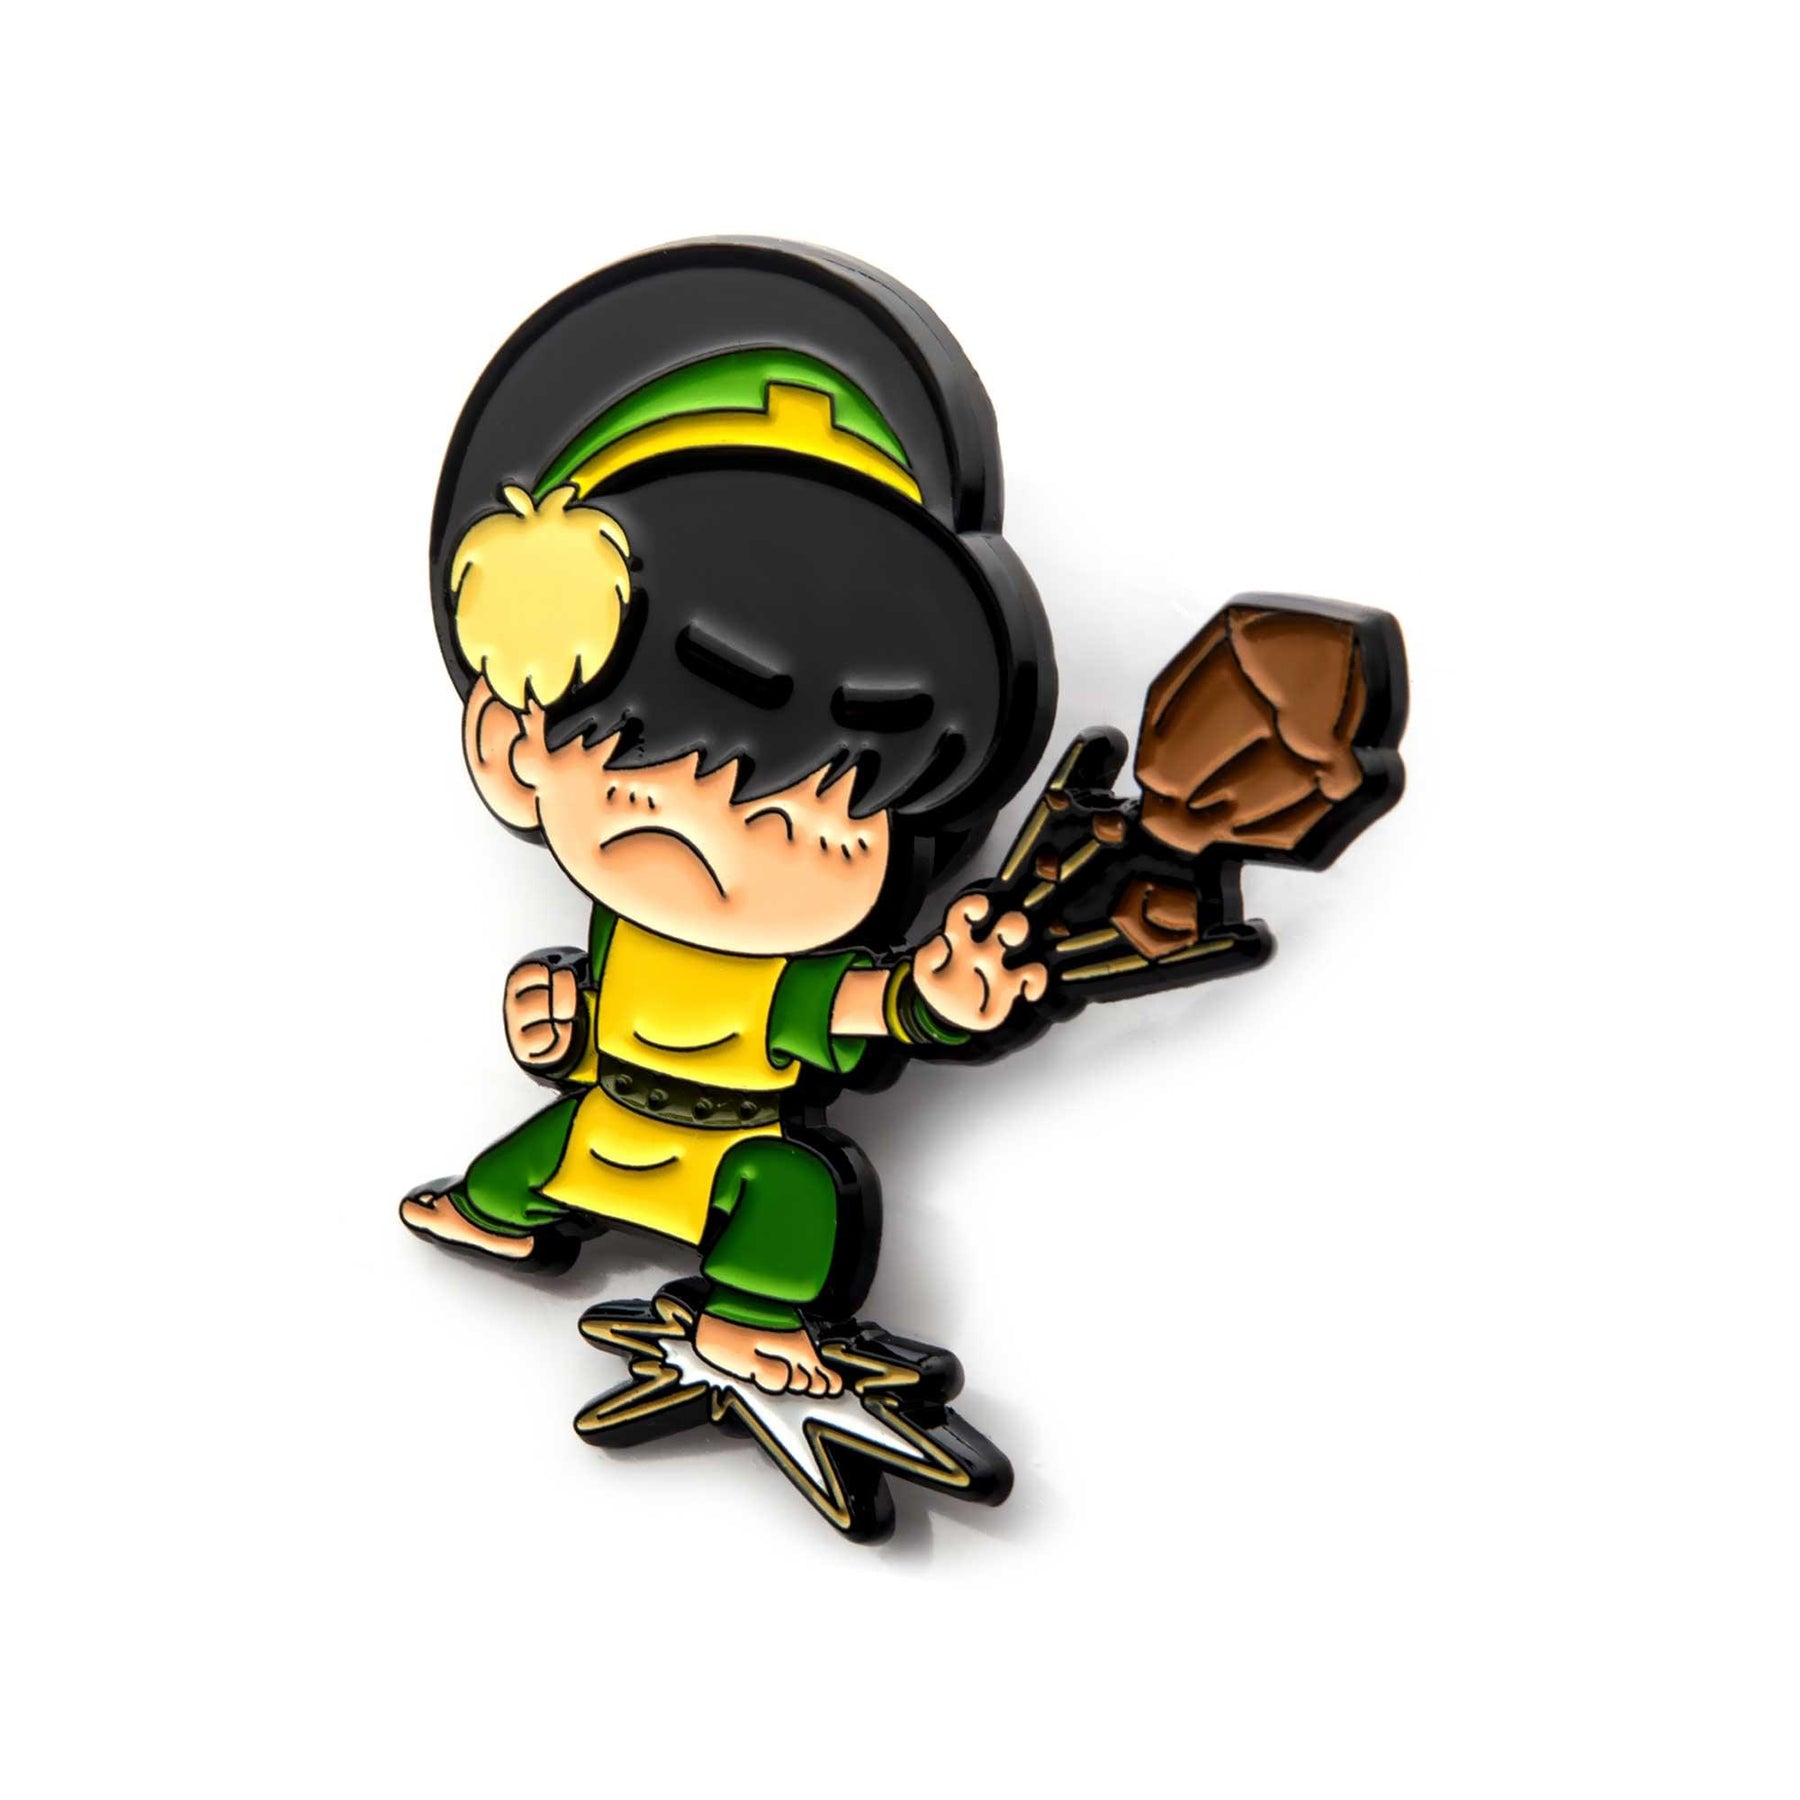 Avatar The Last Airbender Toph Chibi Enamel Collector Pin